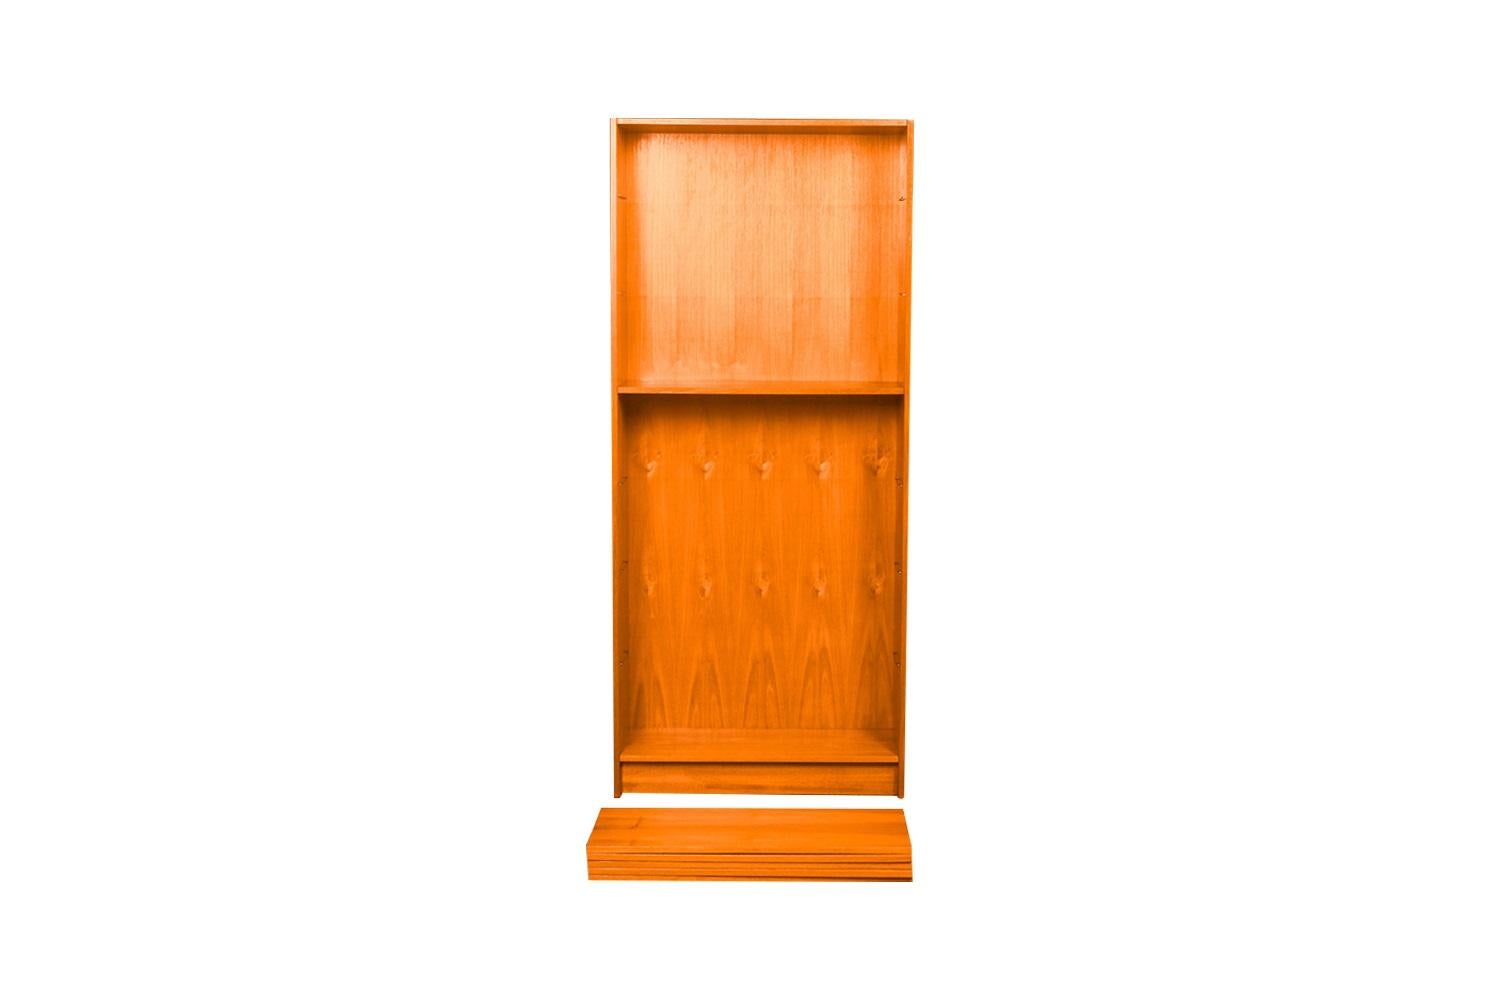 An exceptional teak tall bookcase from Denmark. Gorgeous Mid-Century Modern Teak bookcase / tall bookshelf unit. Beautiful, minimalist, clean, straight lines, features Hidden metal shelf hangers with 6 shelves: 5 adjustable, one fixed for various